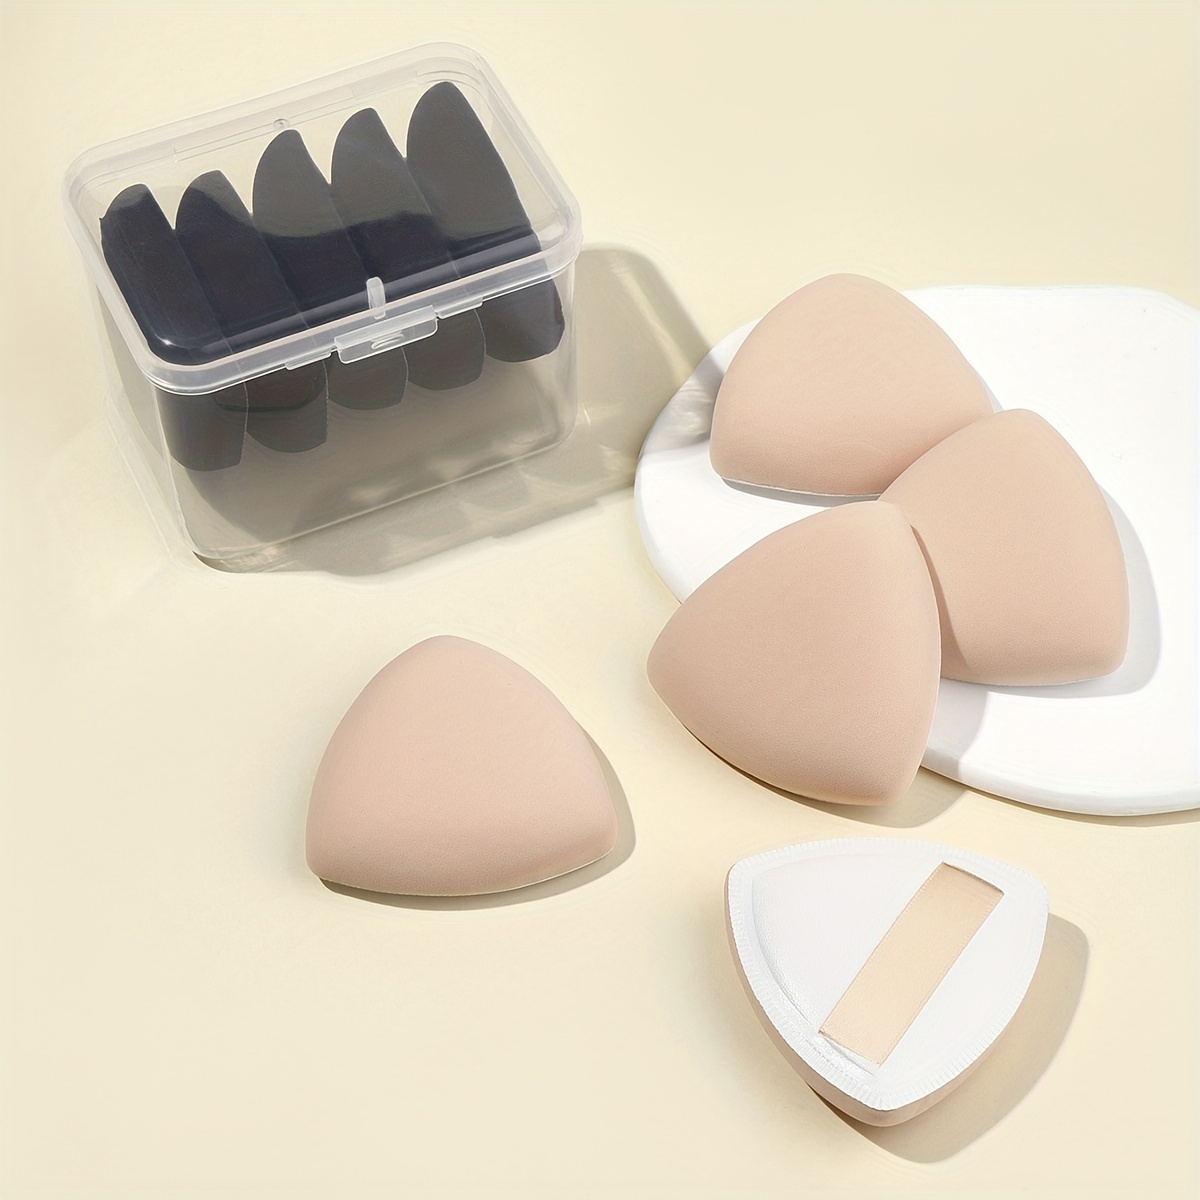 

5 Pcs Soft Reusable Triangle Powder Puff Set, Polyurethane Makeup Sponge Beauty Egg Blenders For Liquid Foundation Powder, Suitable For Beginners And Professional Artists